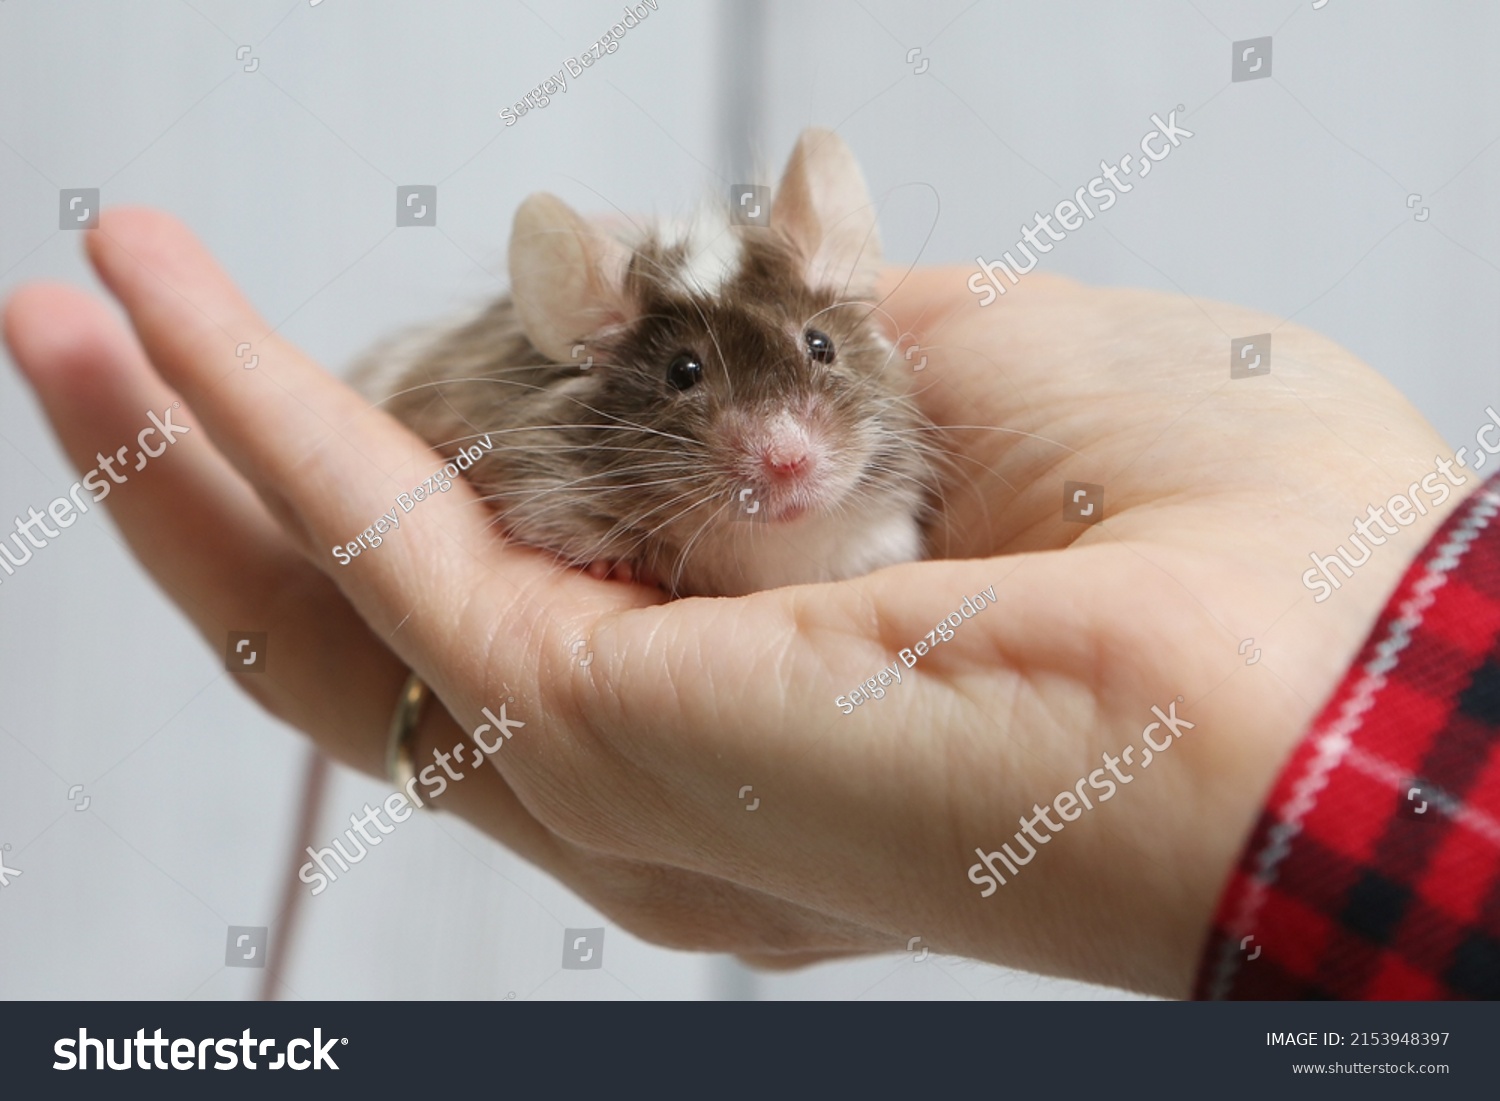 Little pet: mouse on arm. Long haired decorative little mouse. Home animal, fun pet. Cute mice. Bicolor splashed mouse on white background. Decorative satin mouse. Photo of mice, pet. Animal and hand #2153948397